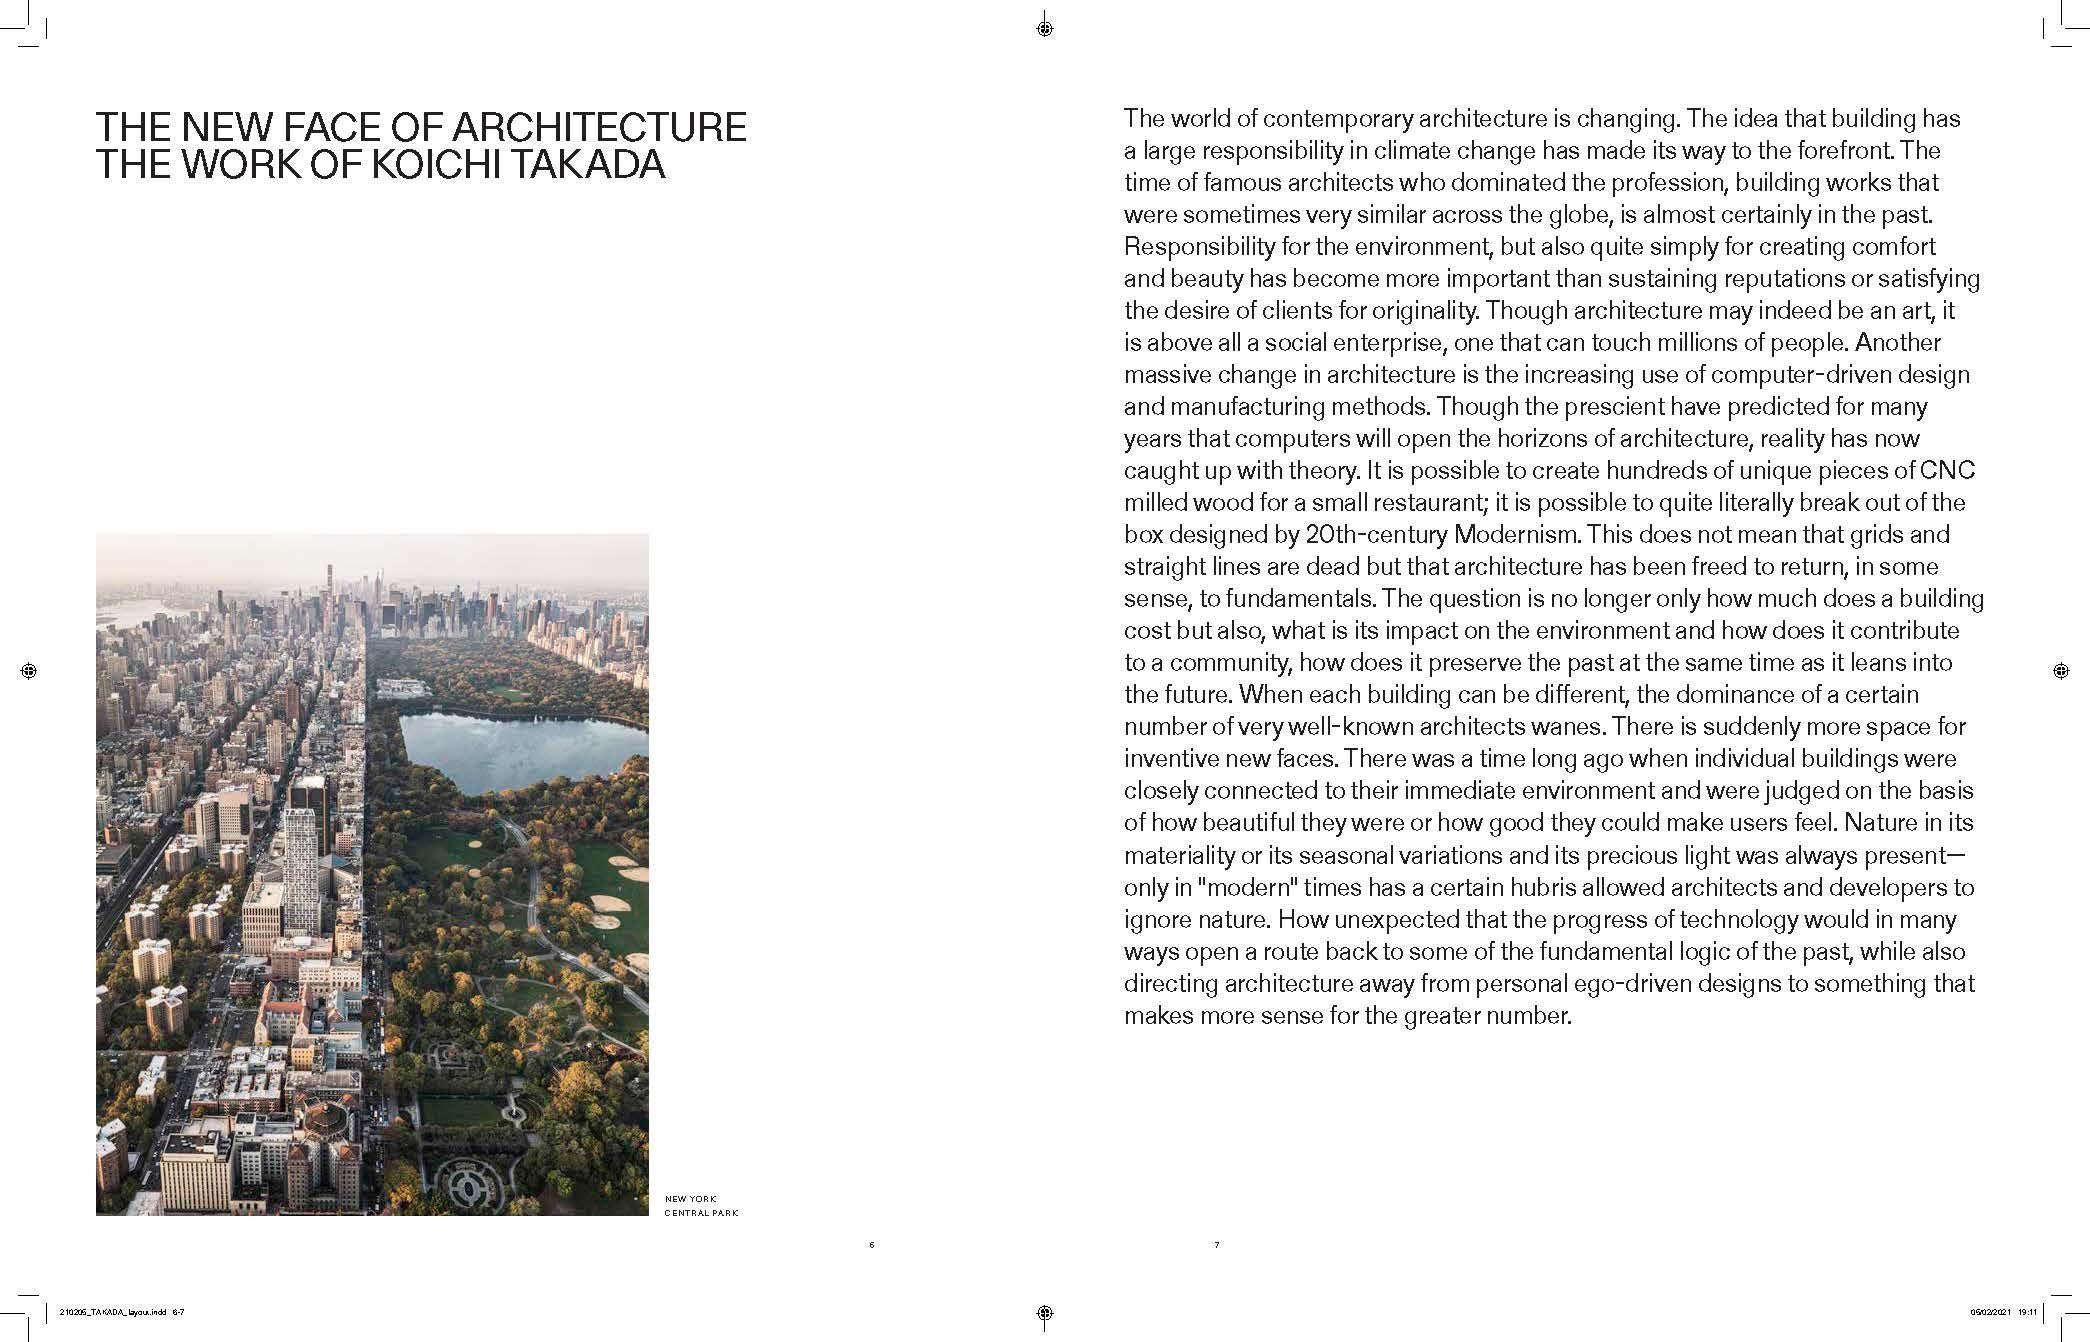 Author Koichi Takada, Text by Philip Jodidio
The first monograph on the Japanese-born, Sydney-based architect, celebrated for his innovative holistic approach to design, nature, and urbanism.
 

Koichi Takada is part of a new generation of